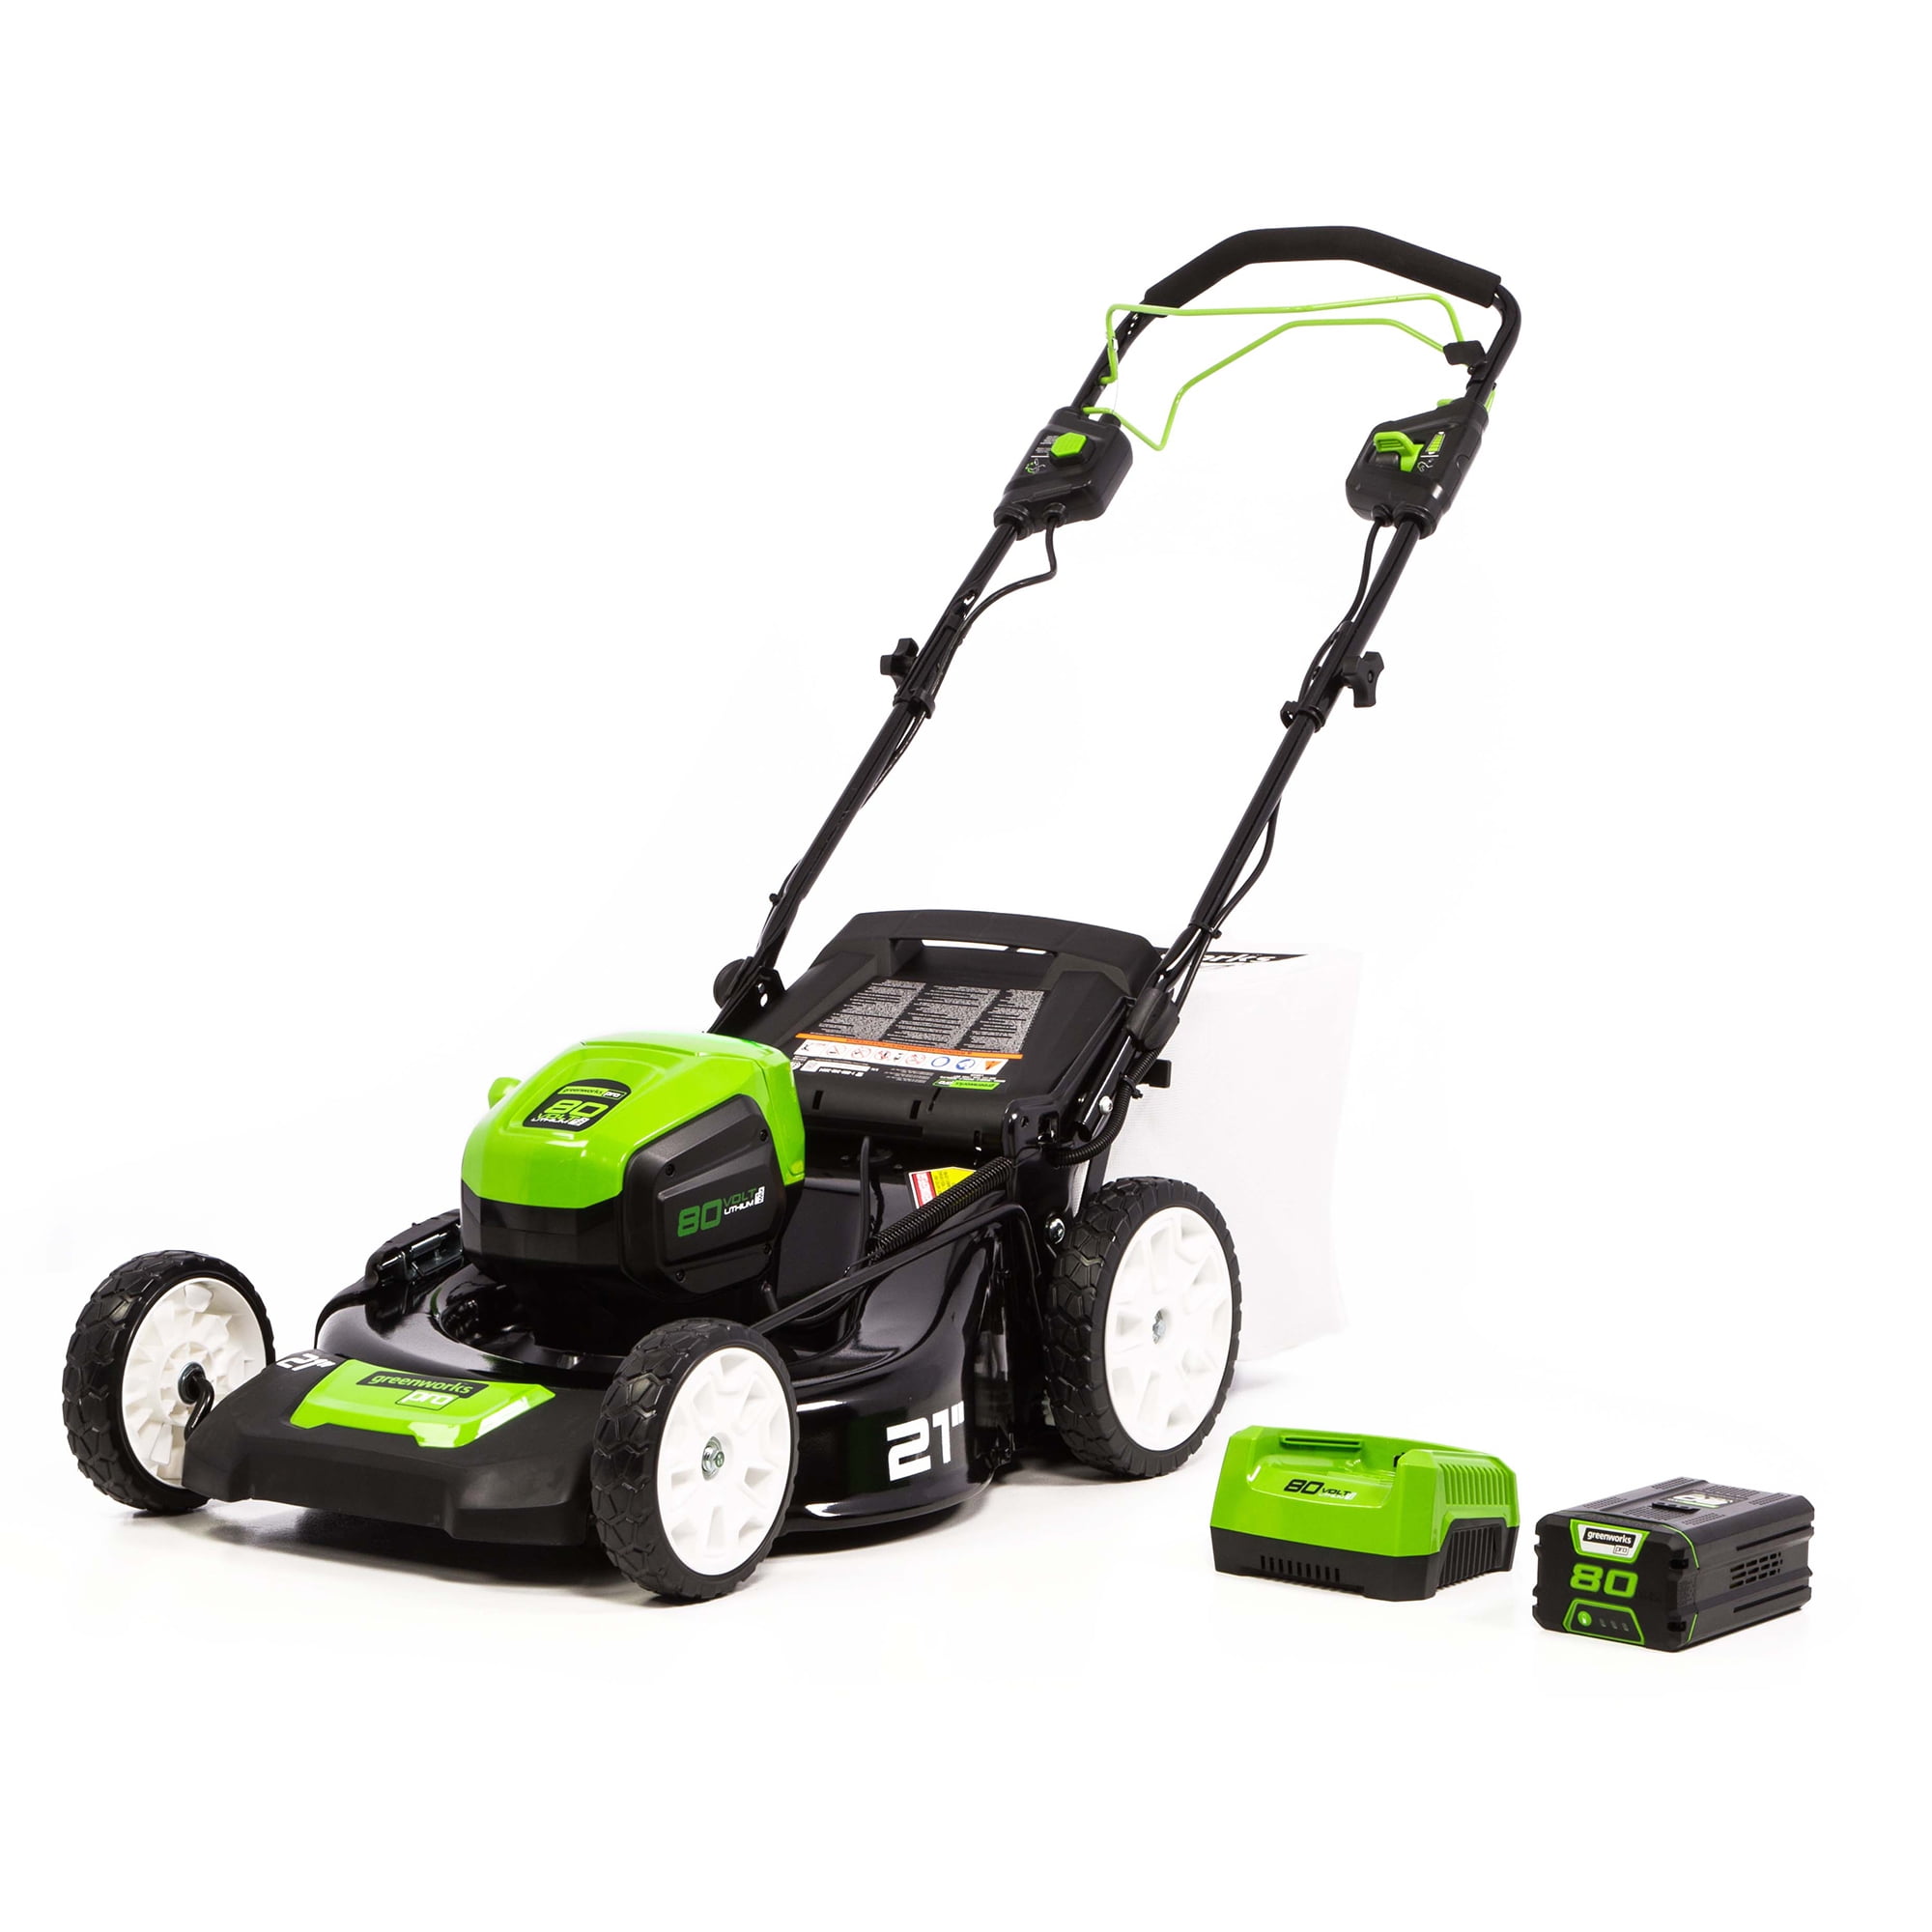 Greenworks 21-Inch 40V Brushless Self-Propelled Mower 6AH Battery and Charger Included M-210-SP 